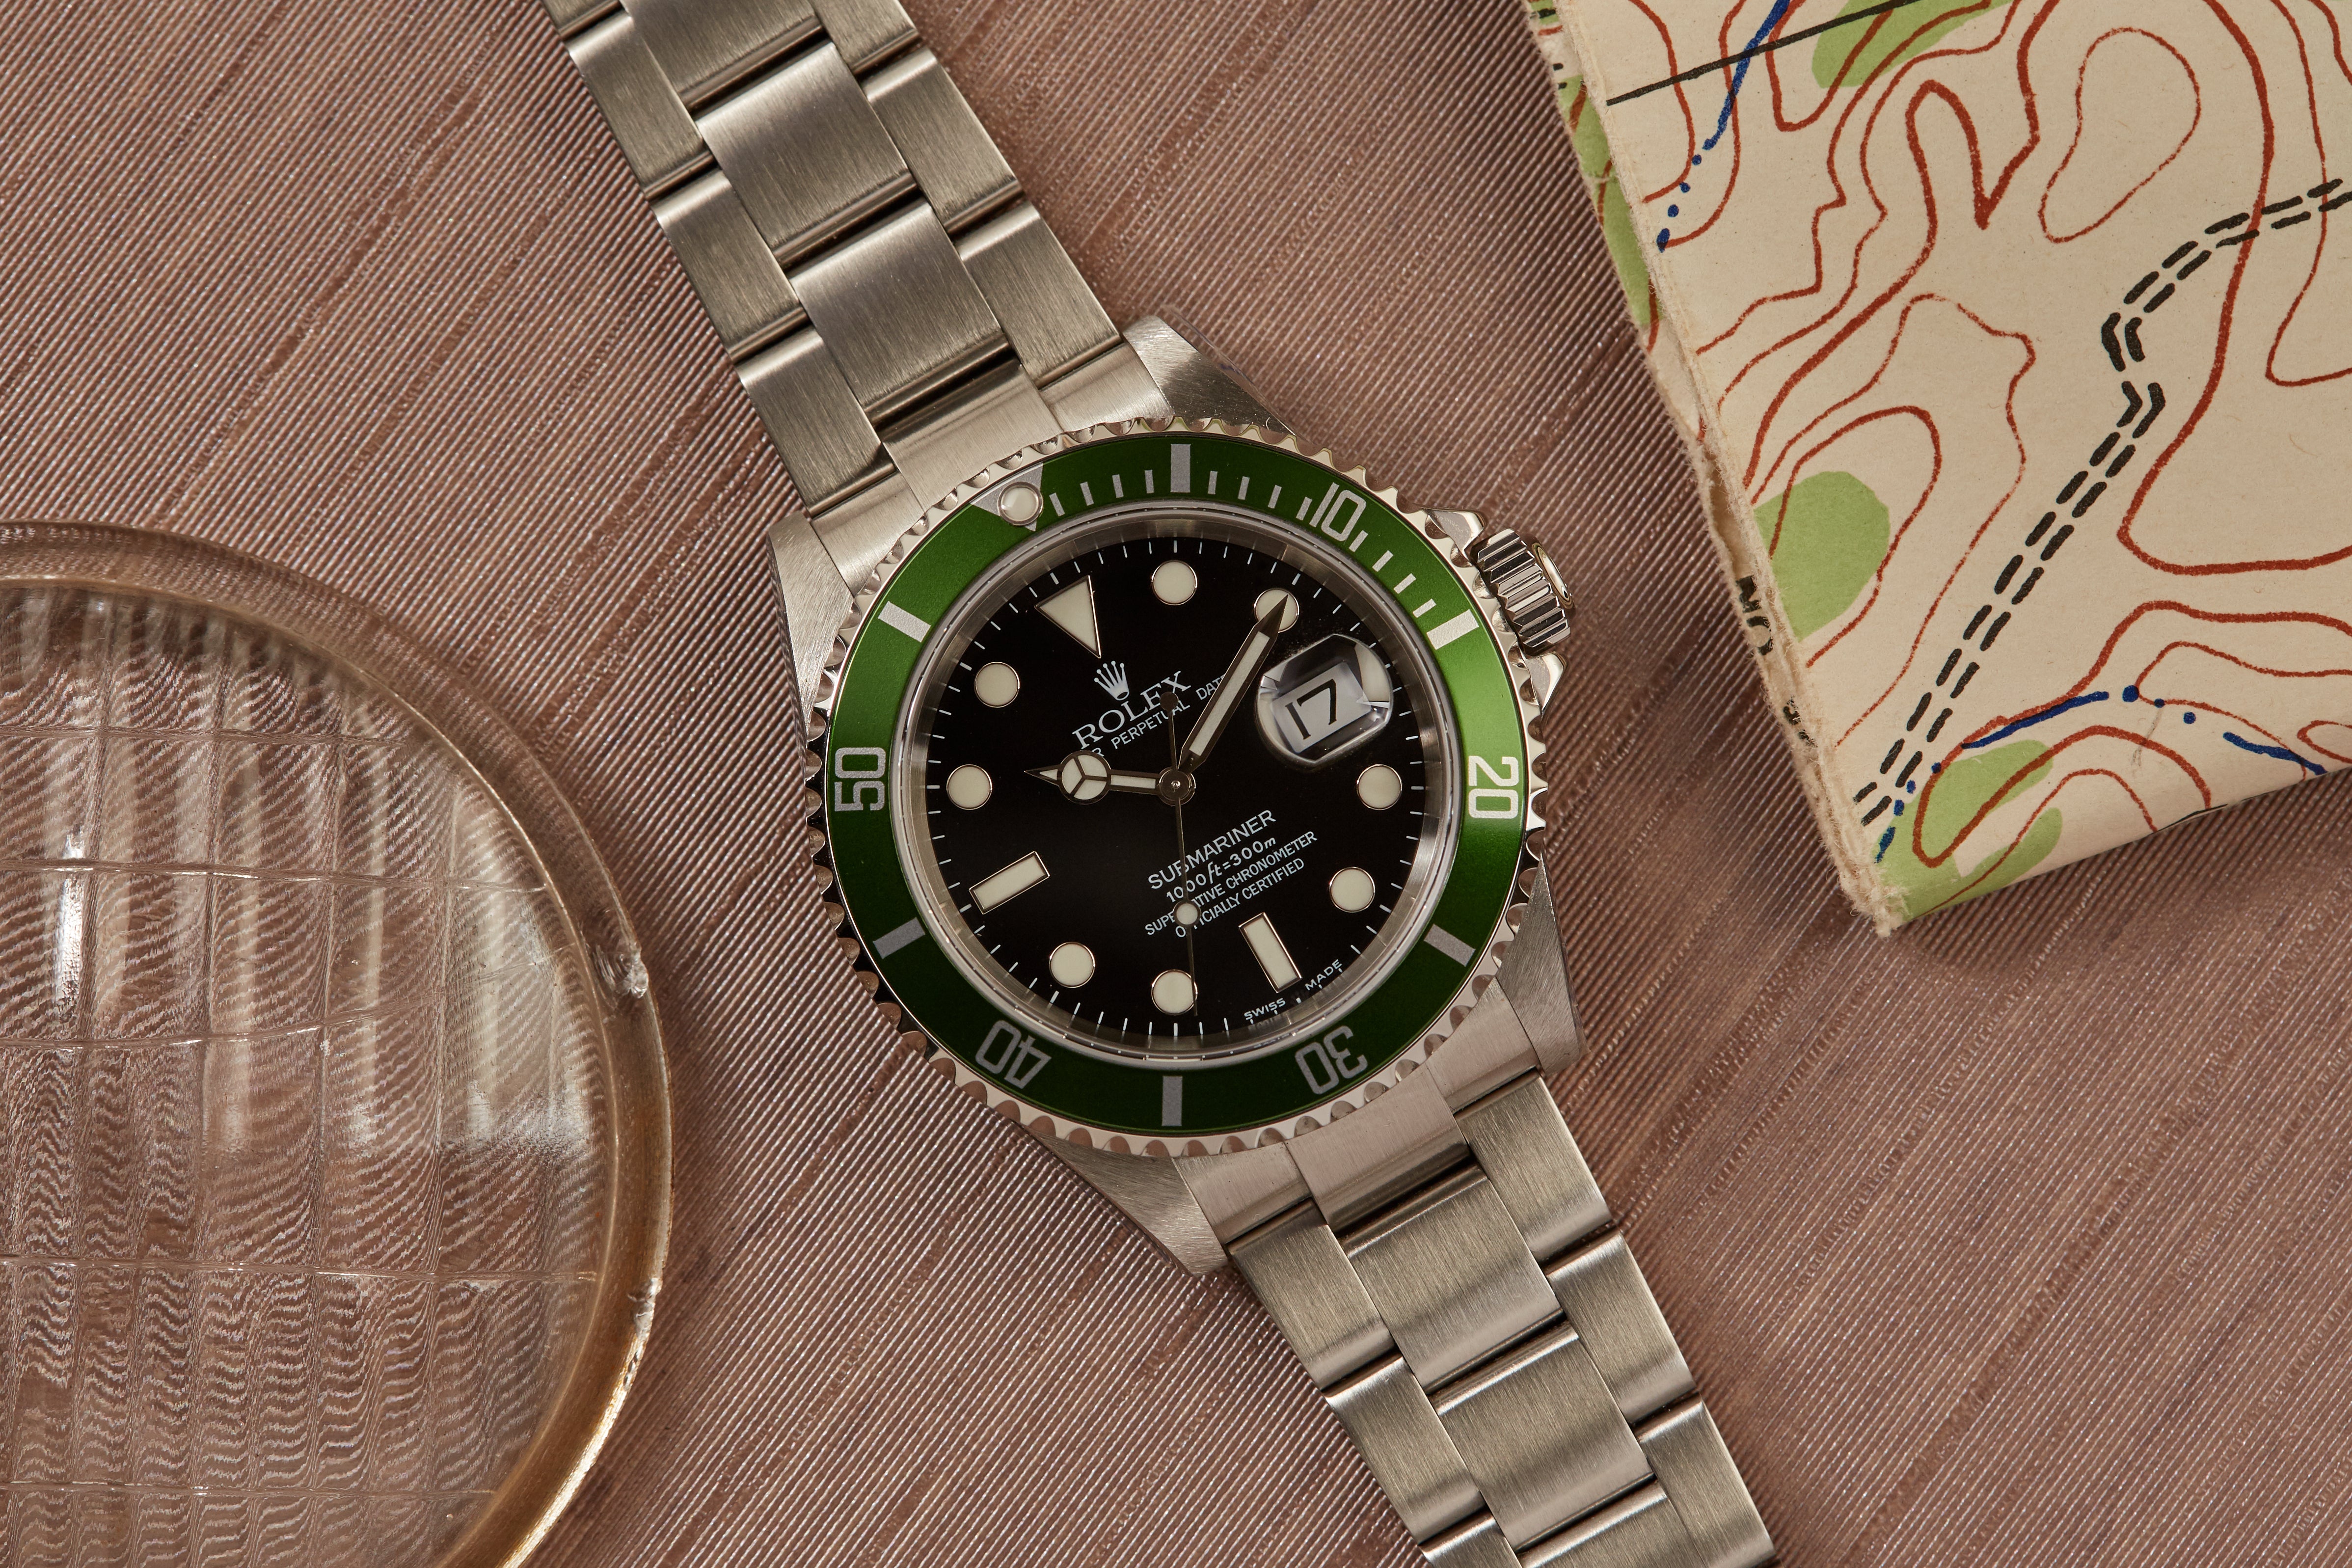 The Rolex Submariner 16610 LV. Are there any homage versions? : r/Watches